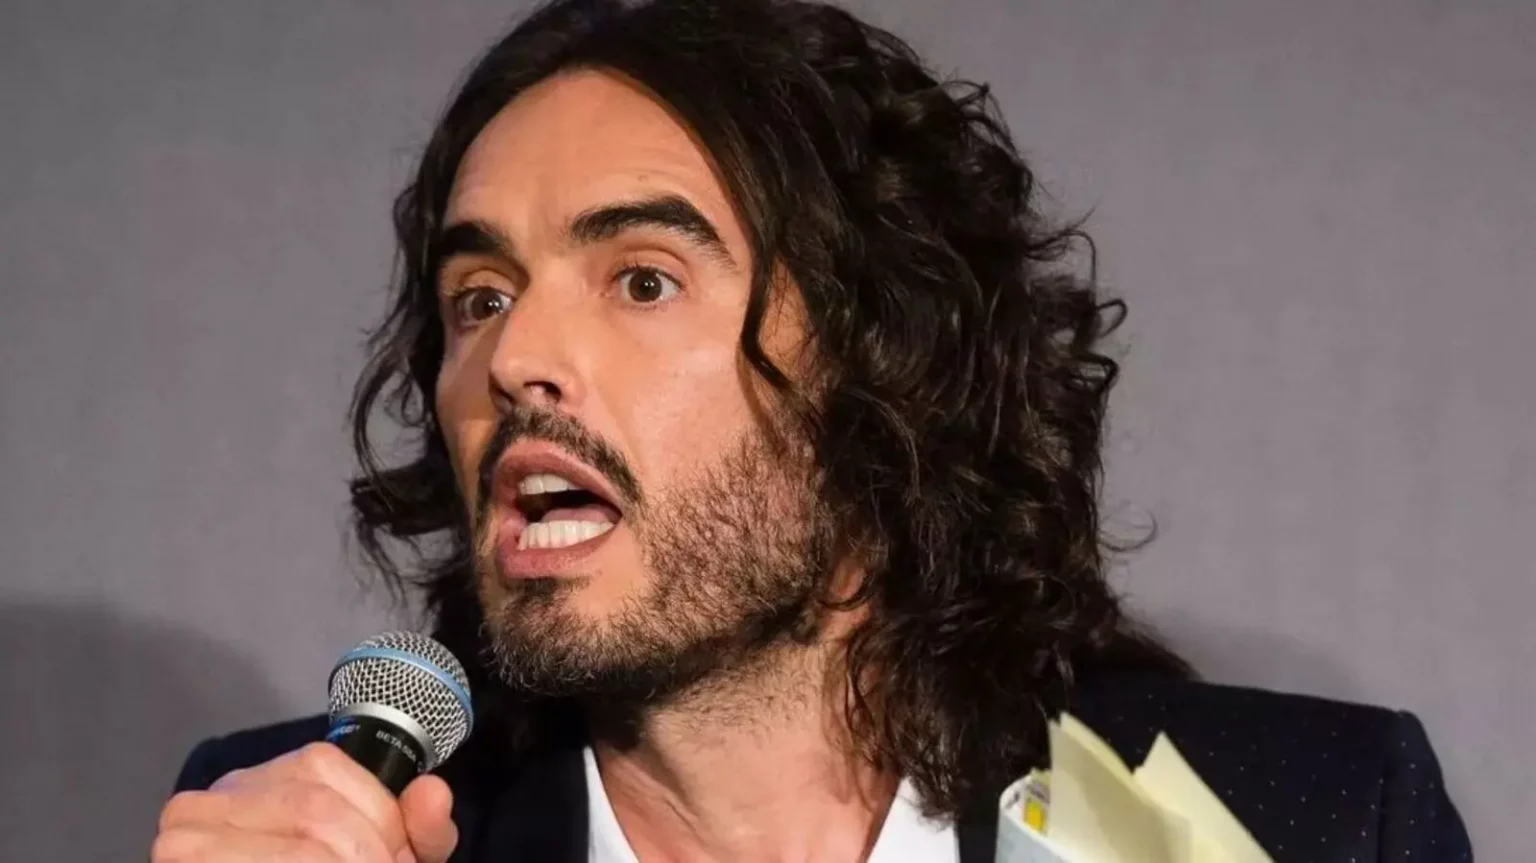 russell-brand-allegations-to-be-investigated-by-bbc-and-channel-4